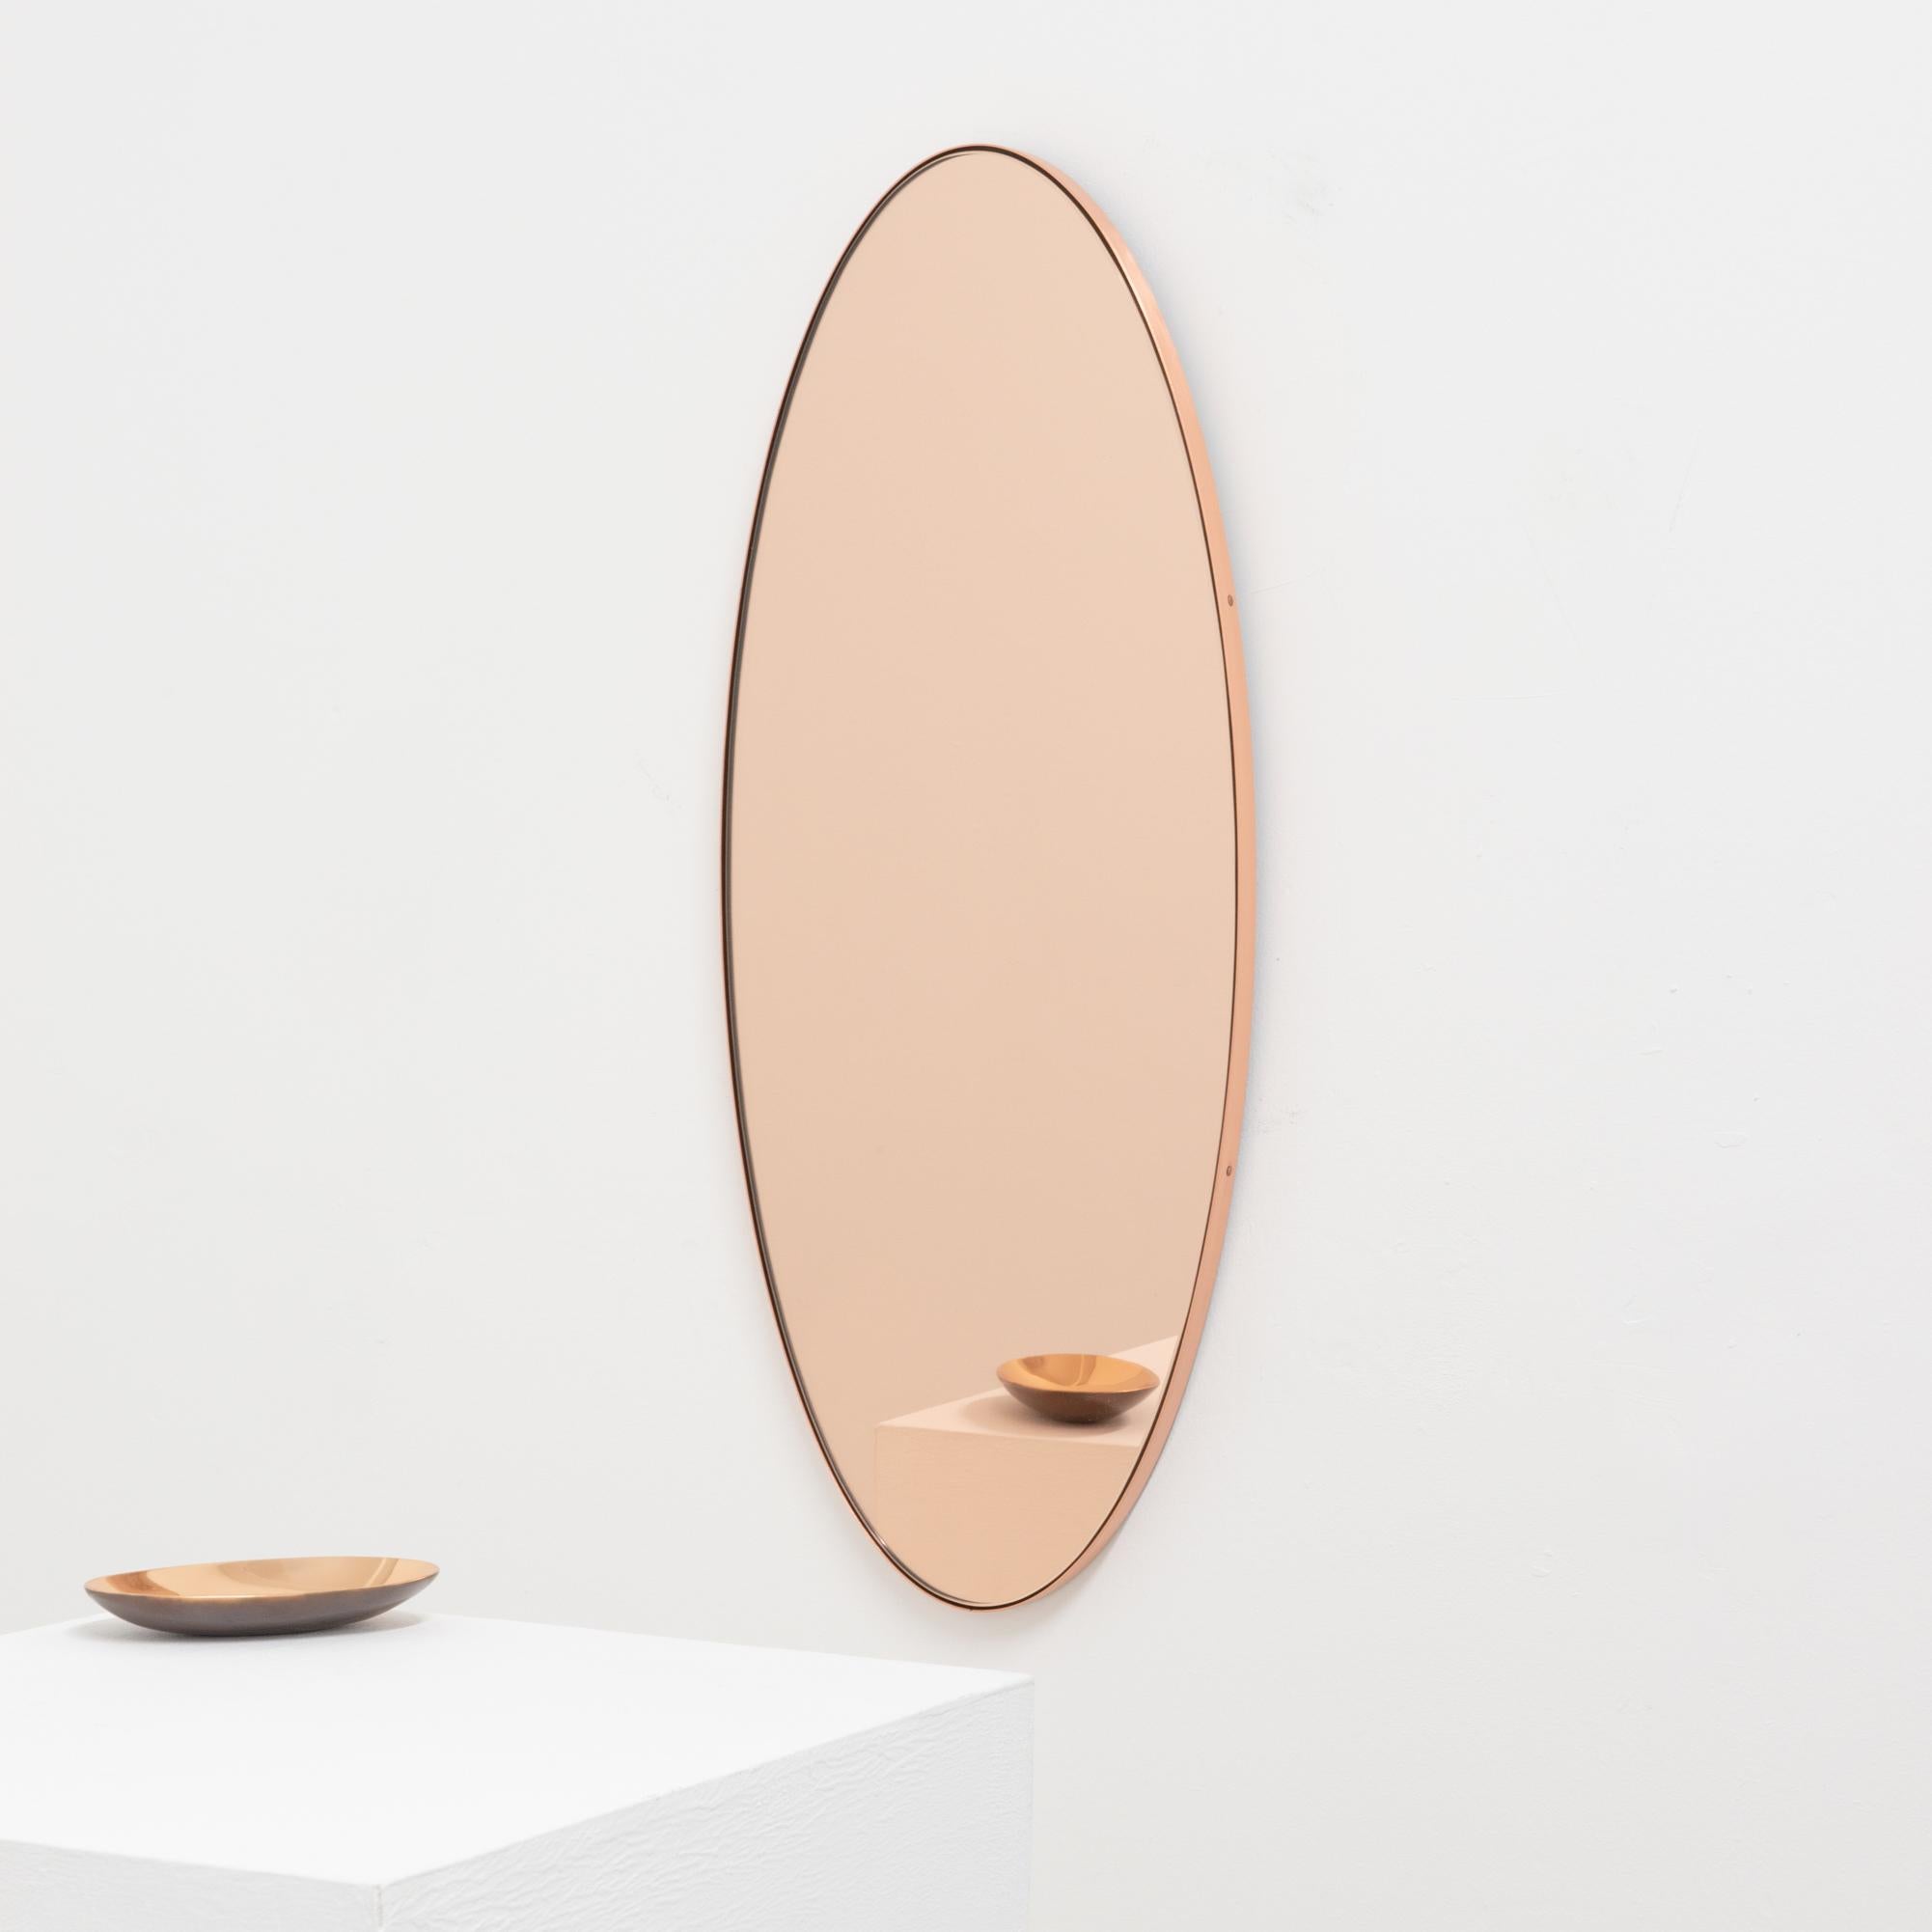 Contemporary Ovalis Oval Peach Rose Gold Handcrafted Mirror with Copper Frame, Large For Sale